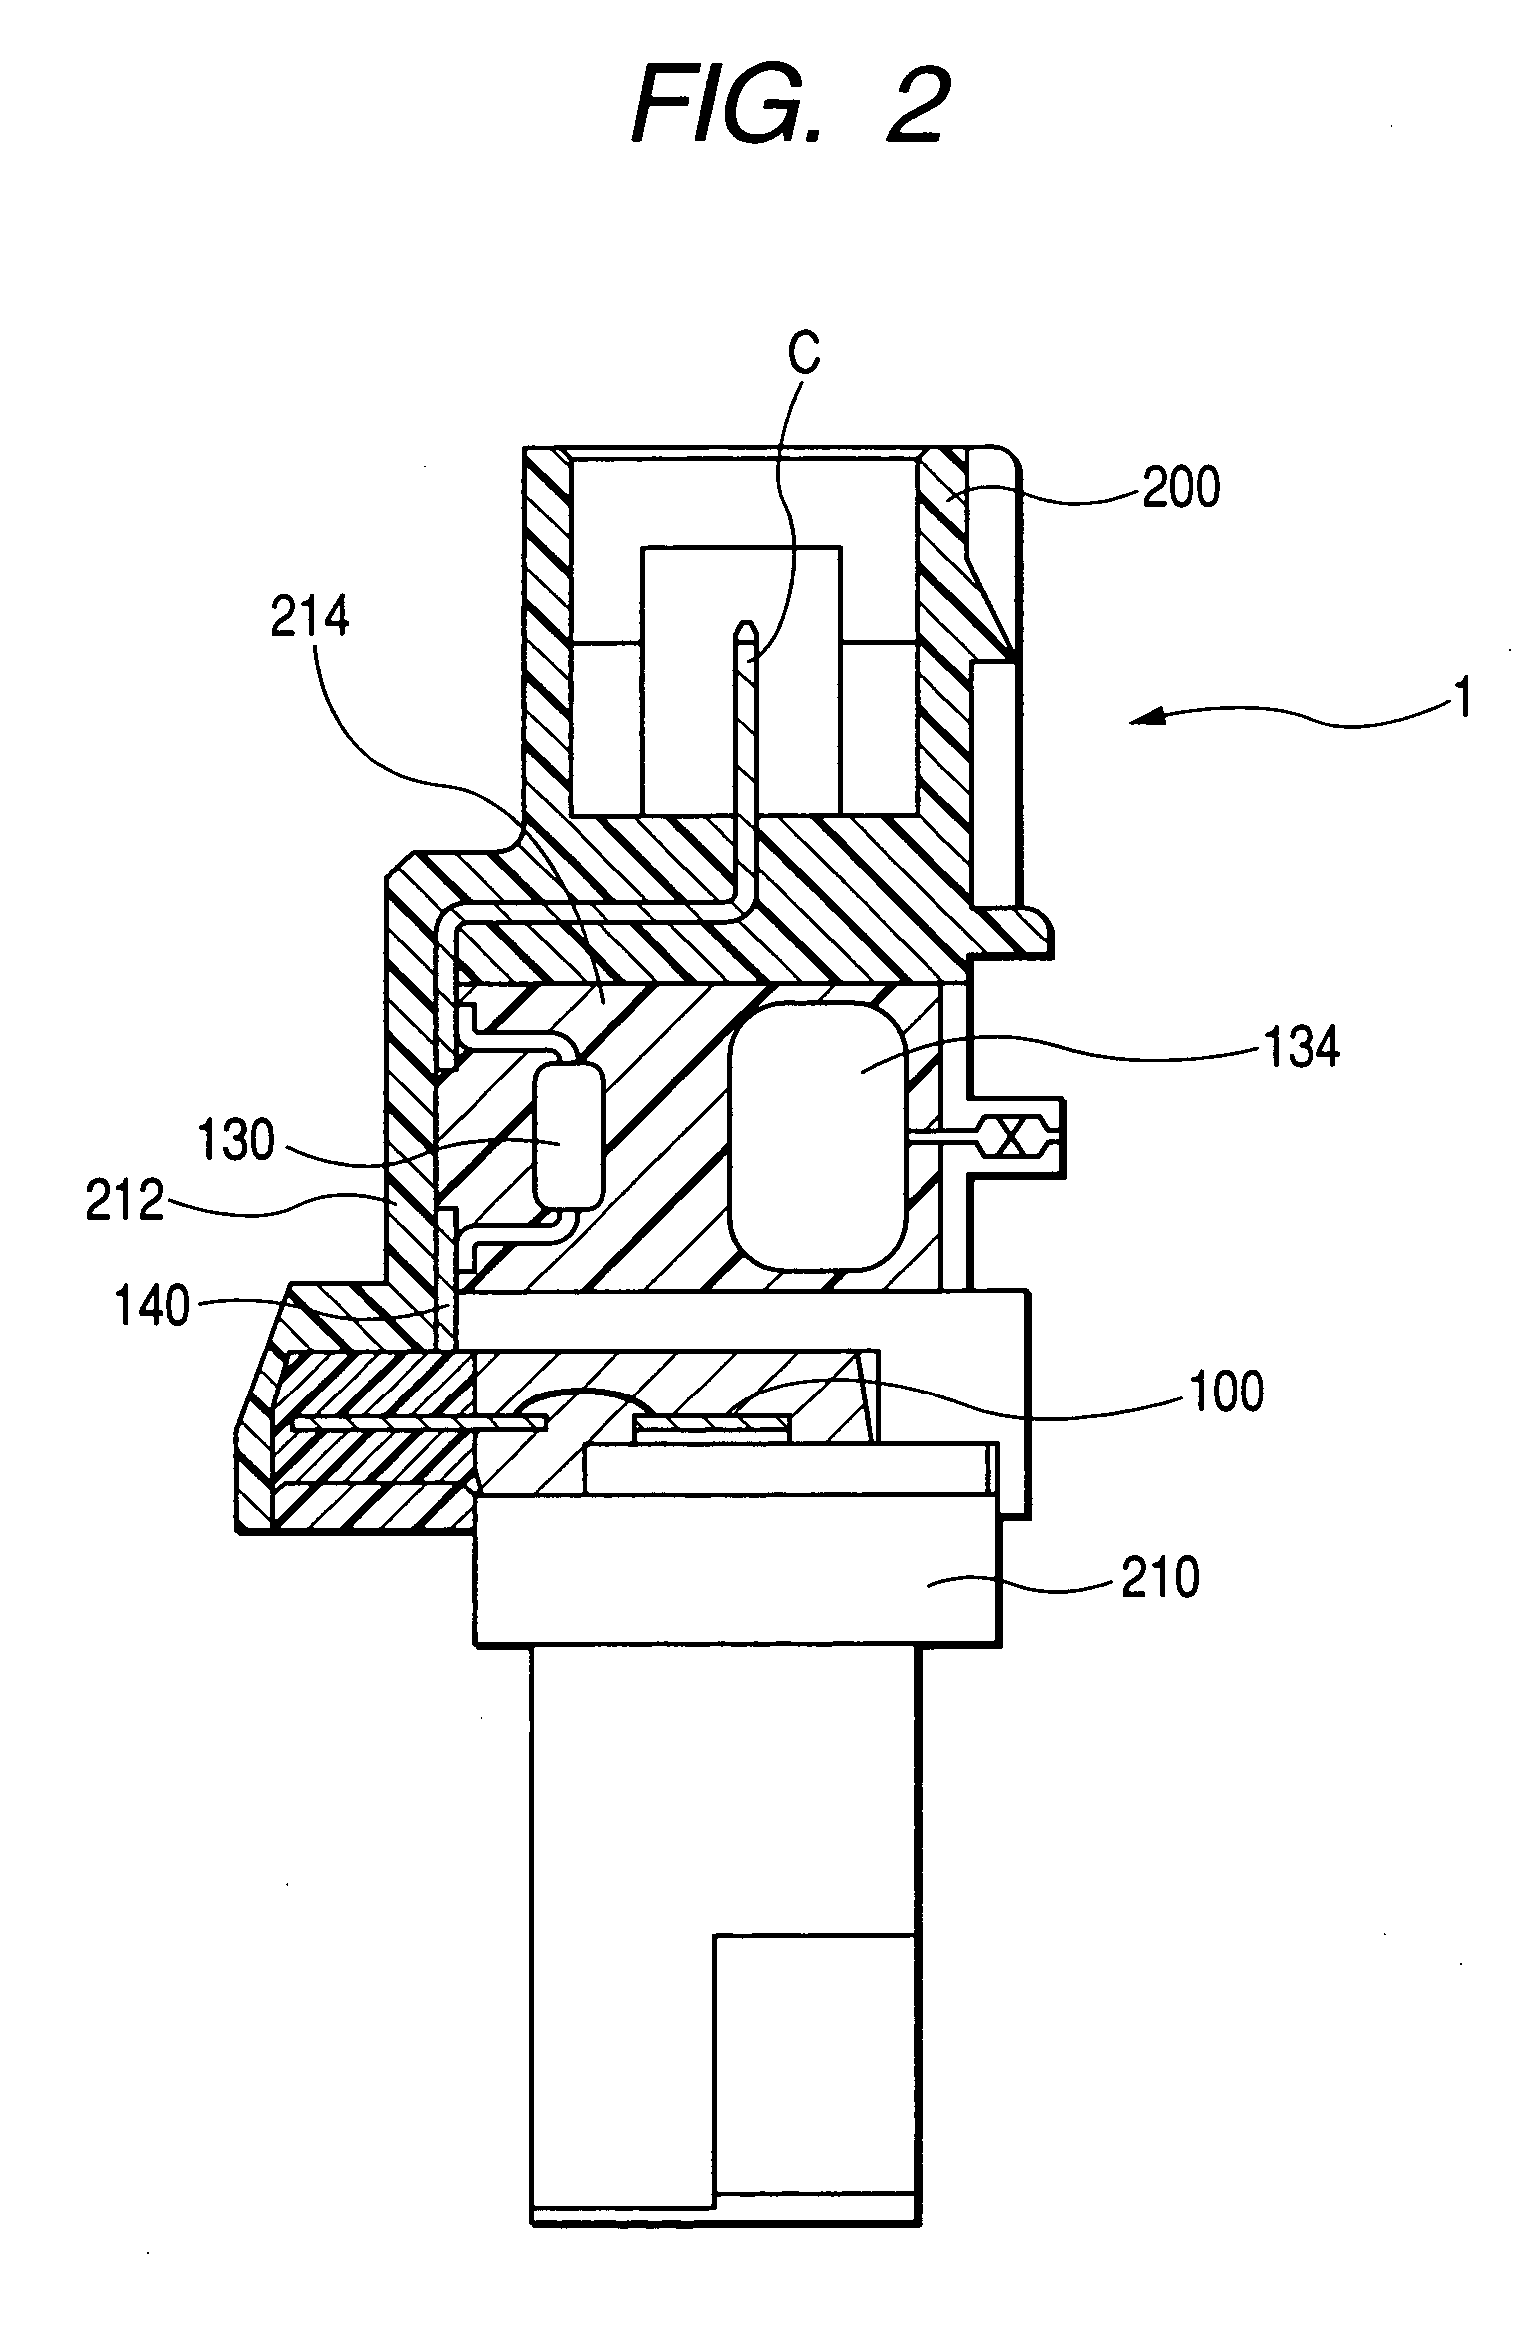 Power generation control device for vehicle generator